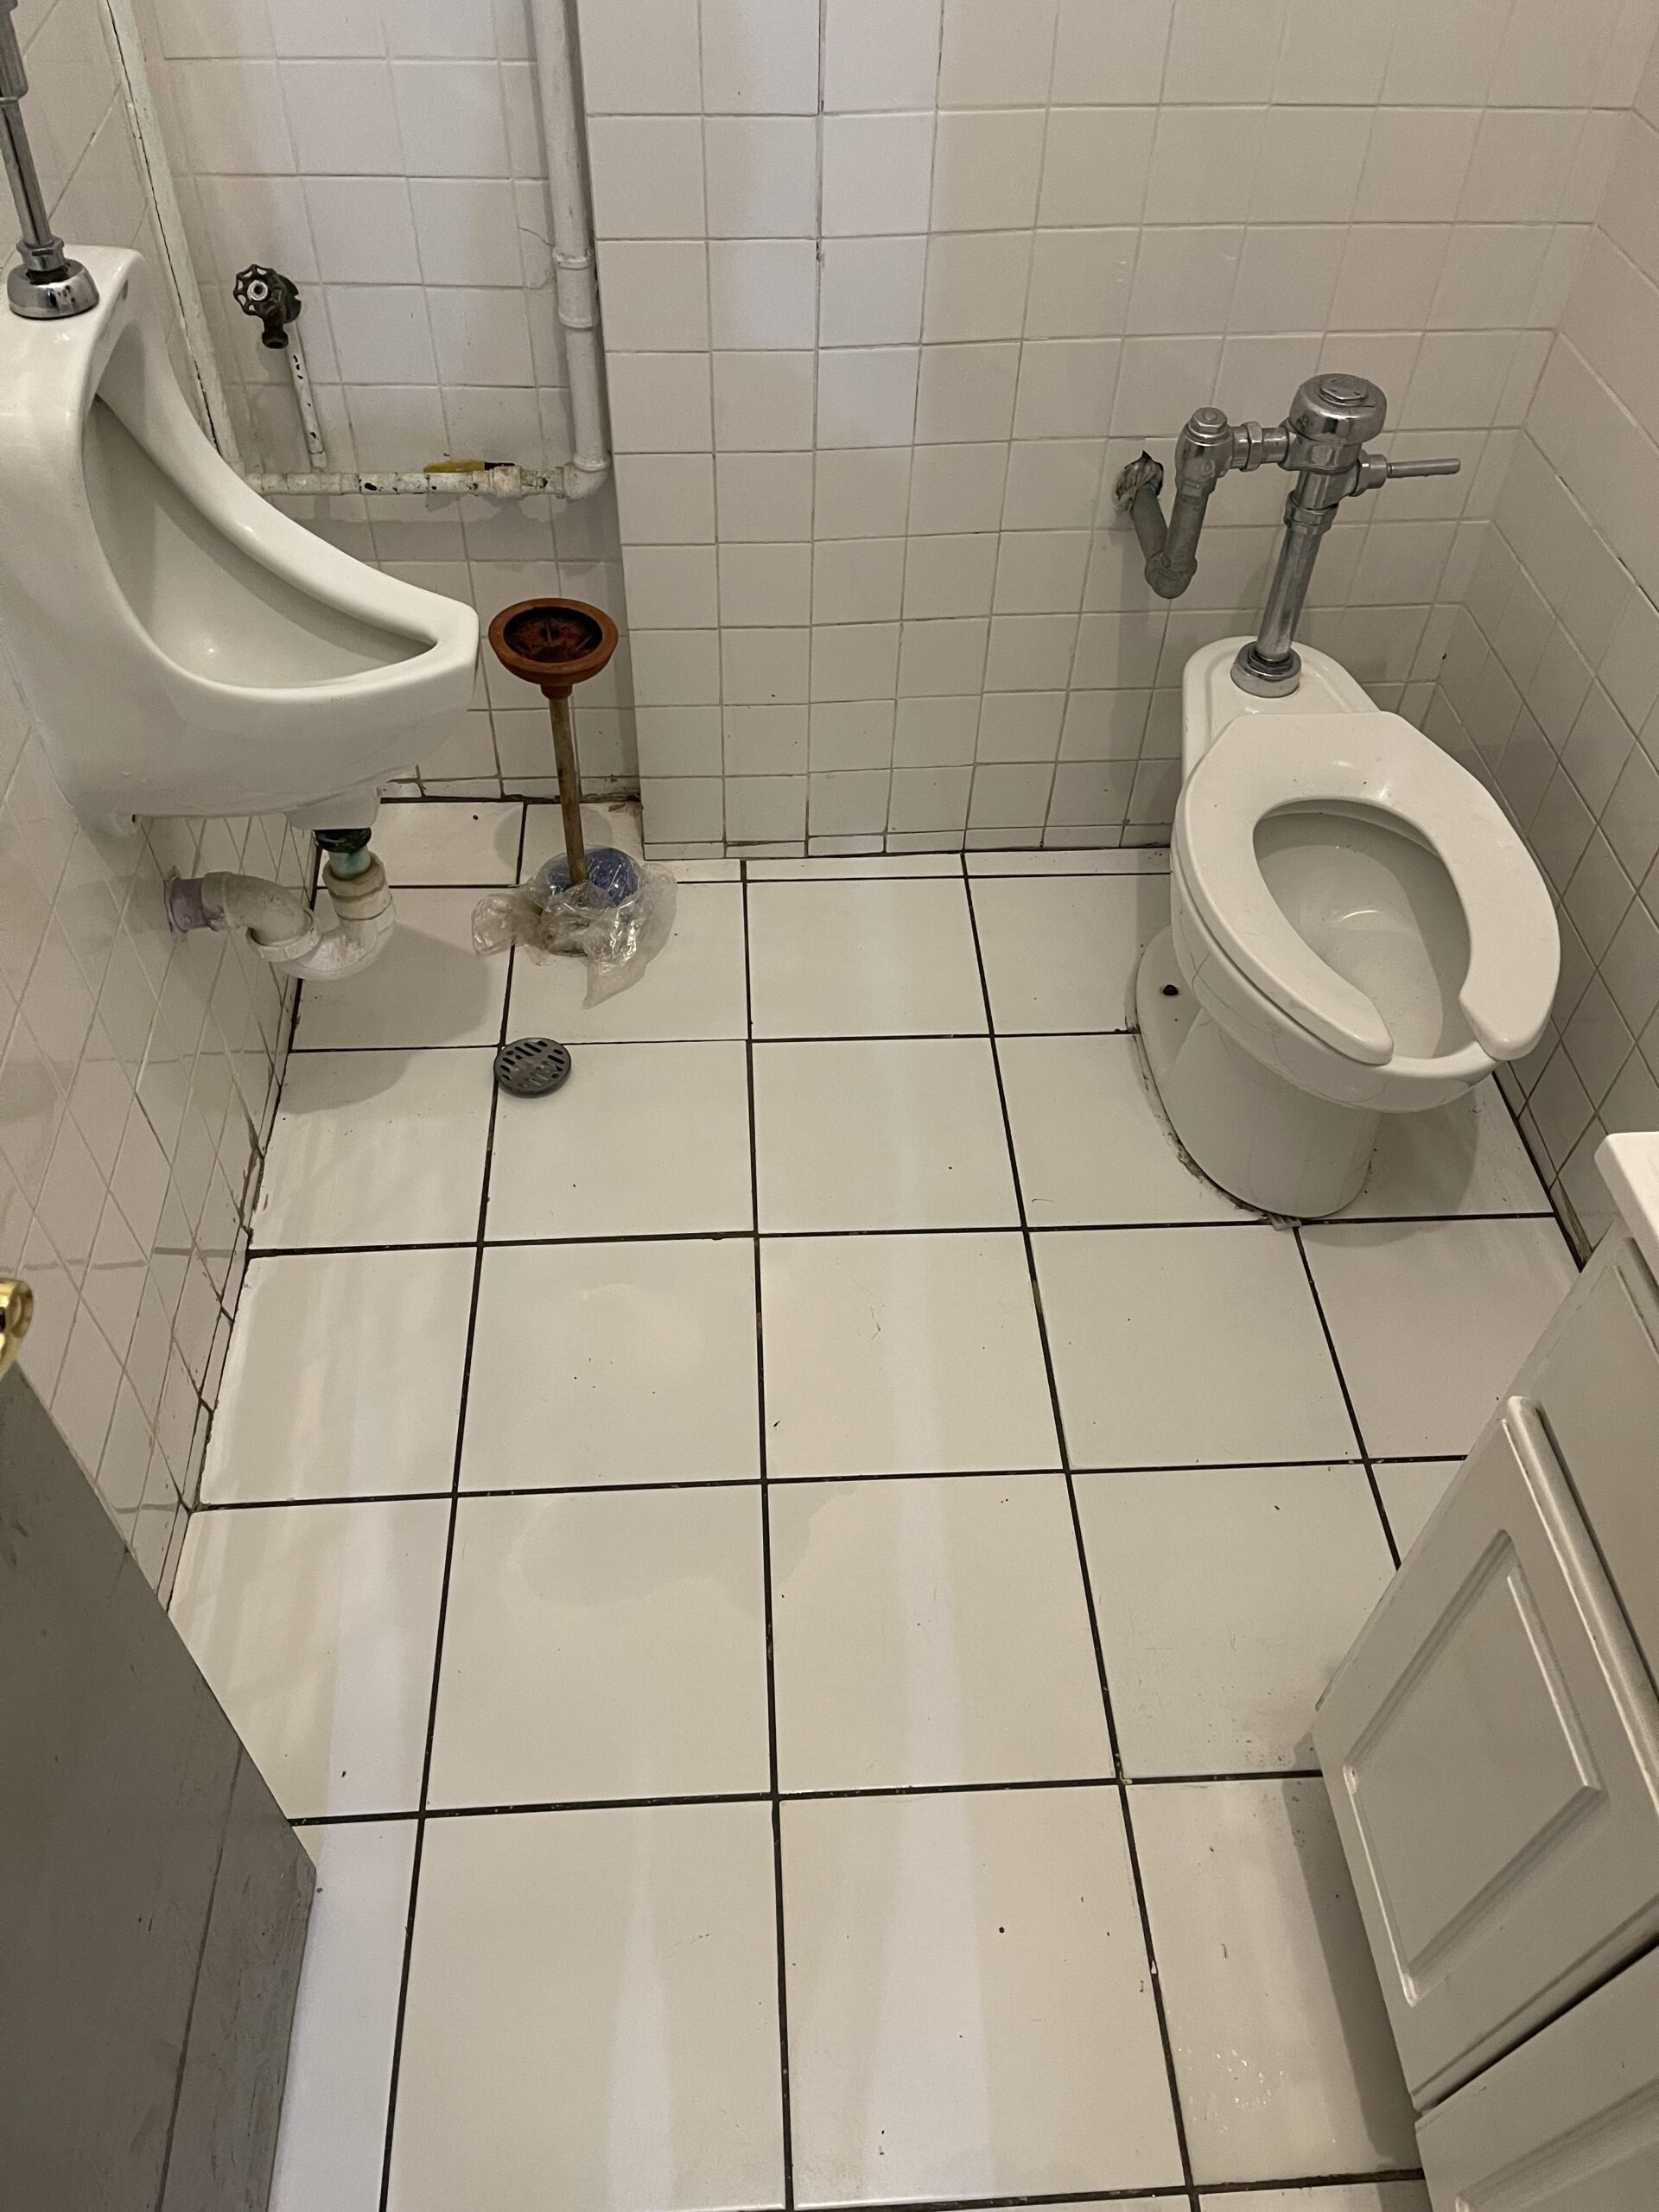 A bathroom with white tile and tiled floors.